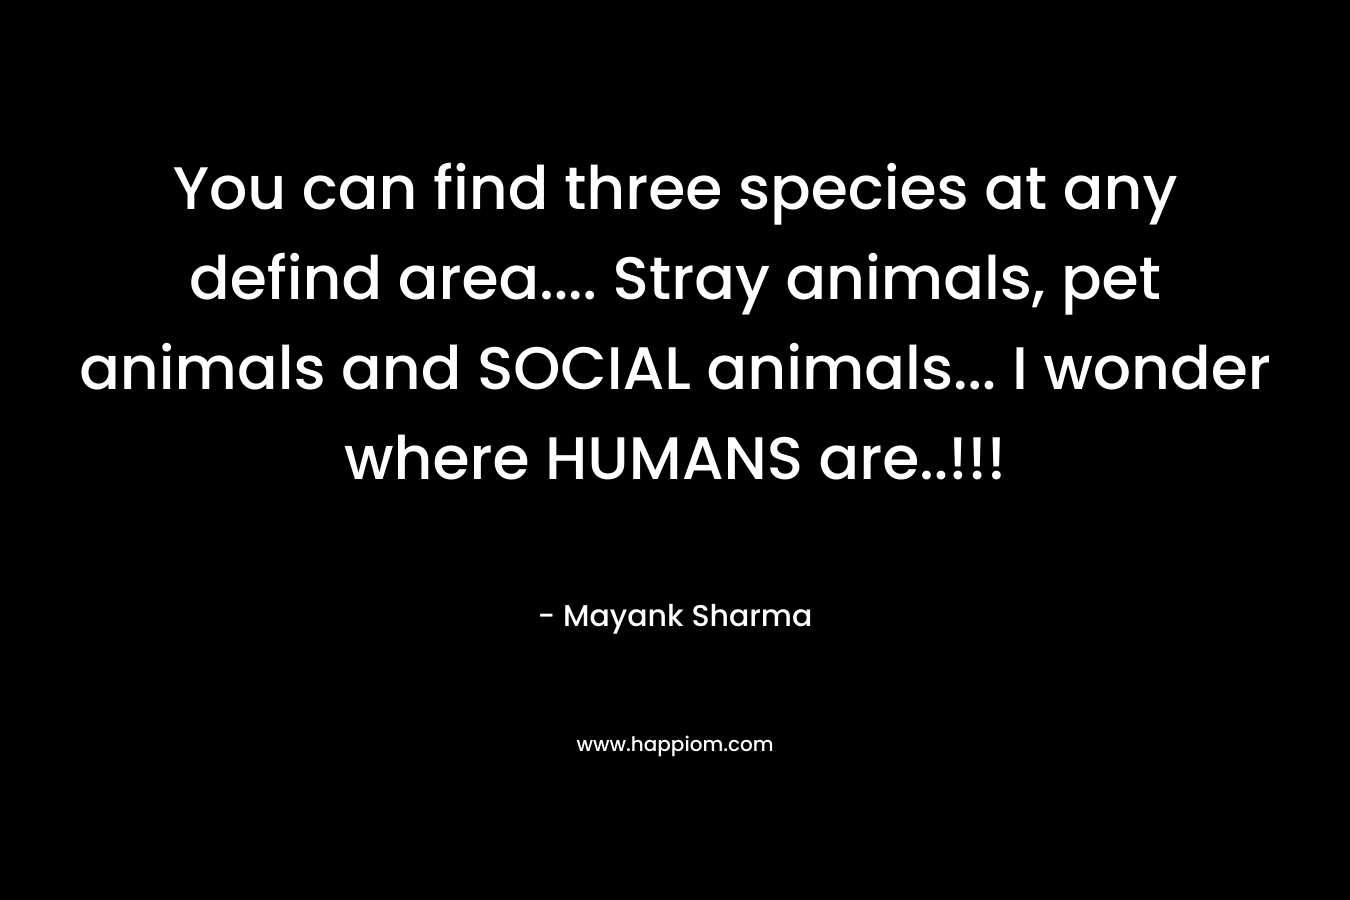 You can find three species at any defind area.... Stray animals, pet animals and SOCIAL animals... I wonder where HUMANS are..!!!